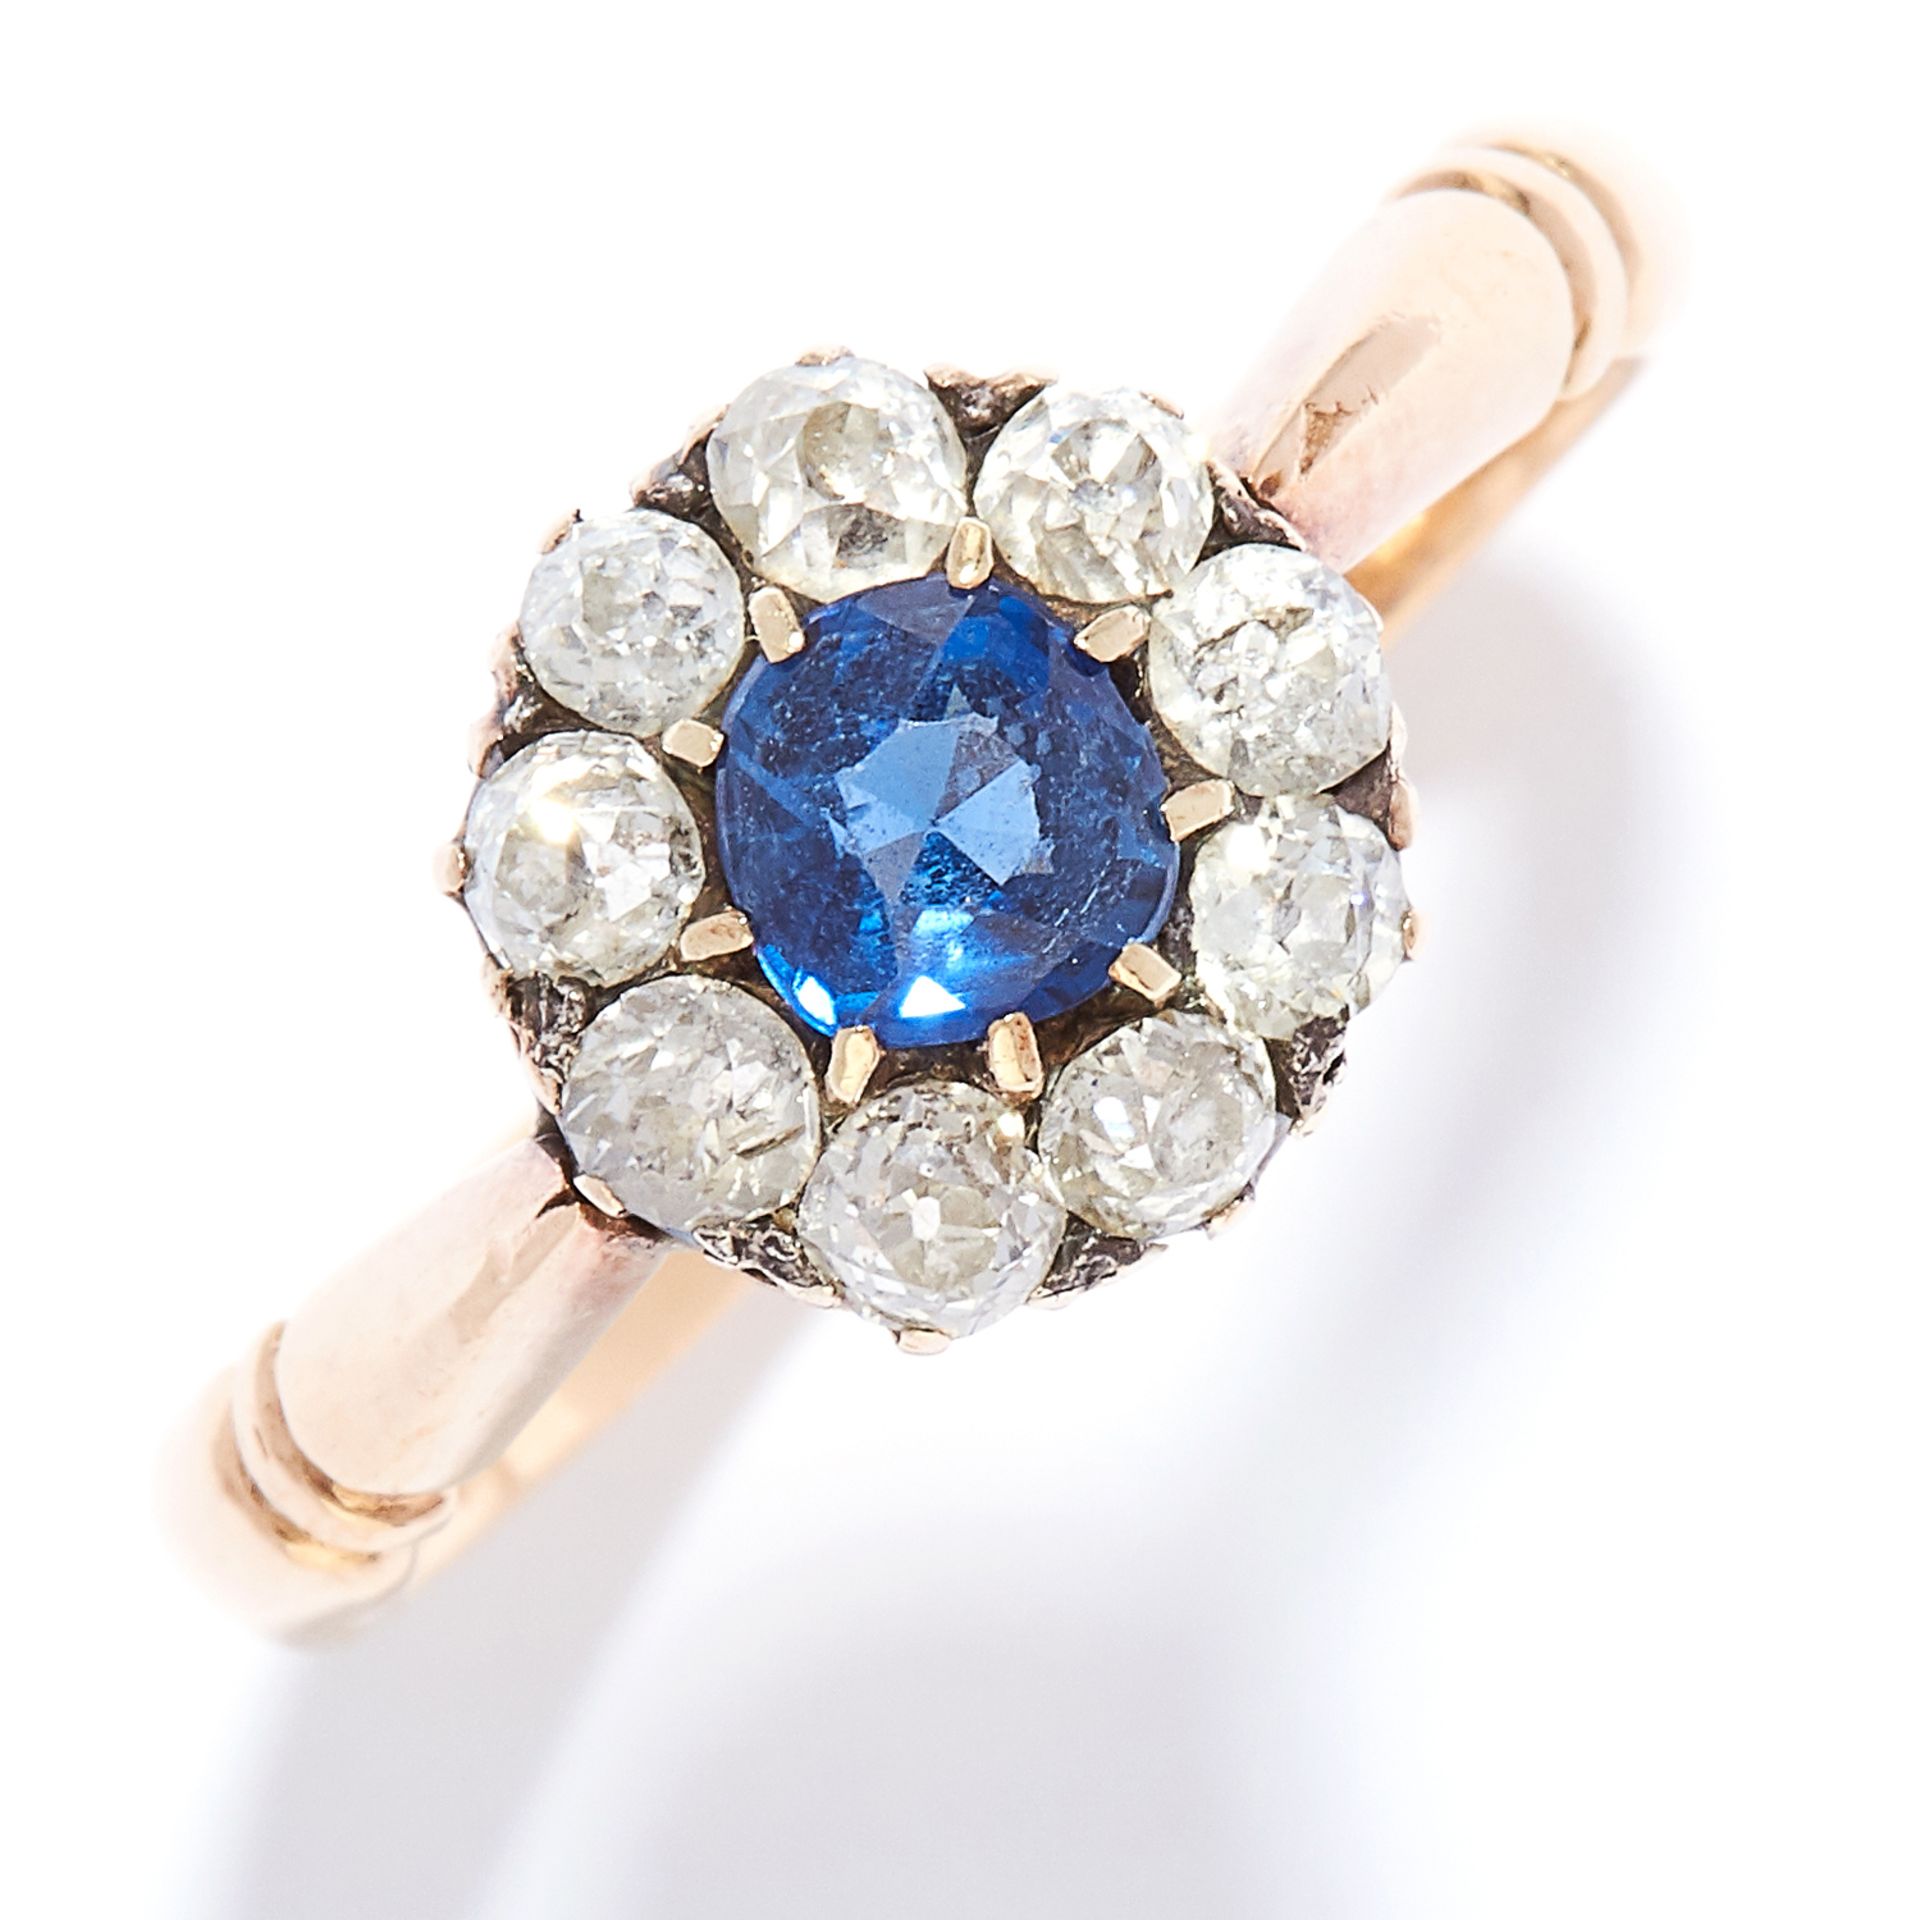 ANTIQUE SAPPHIRE AND DIAMOND CLUSTER RING, 1876 in 18ct yellow gold, set with a round cut sapphire